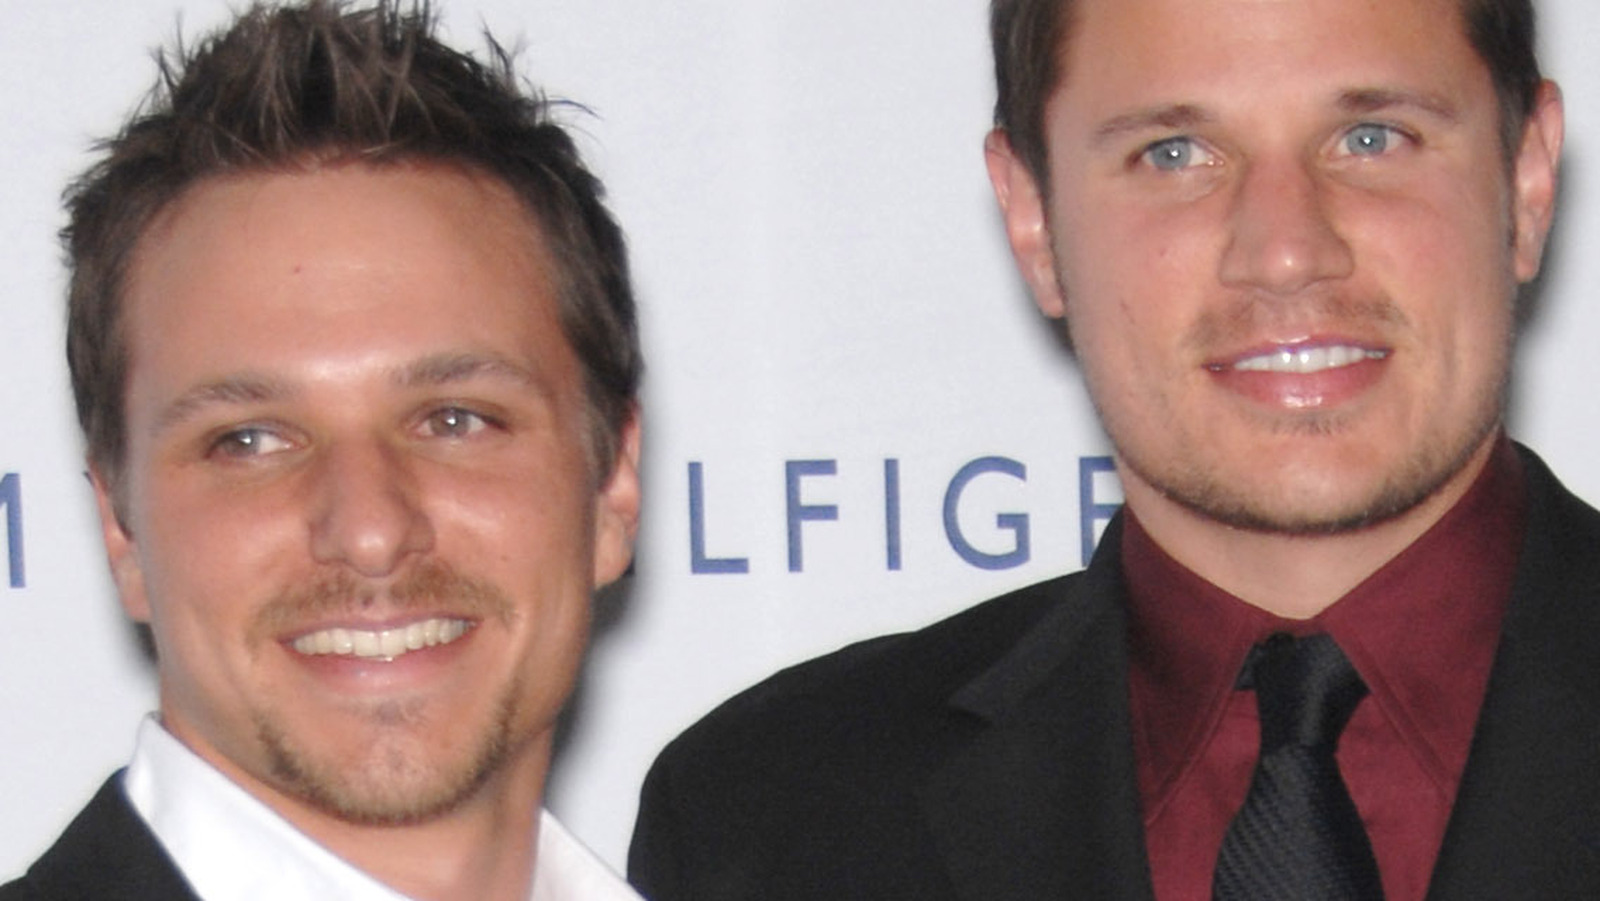 The Truth About Drew Lachey And Nick Lachey's Relationship